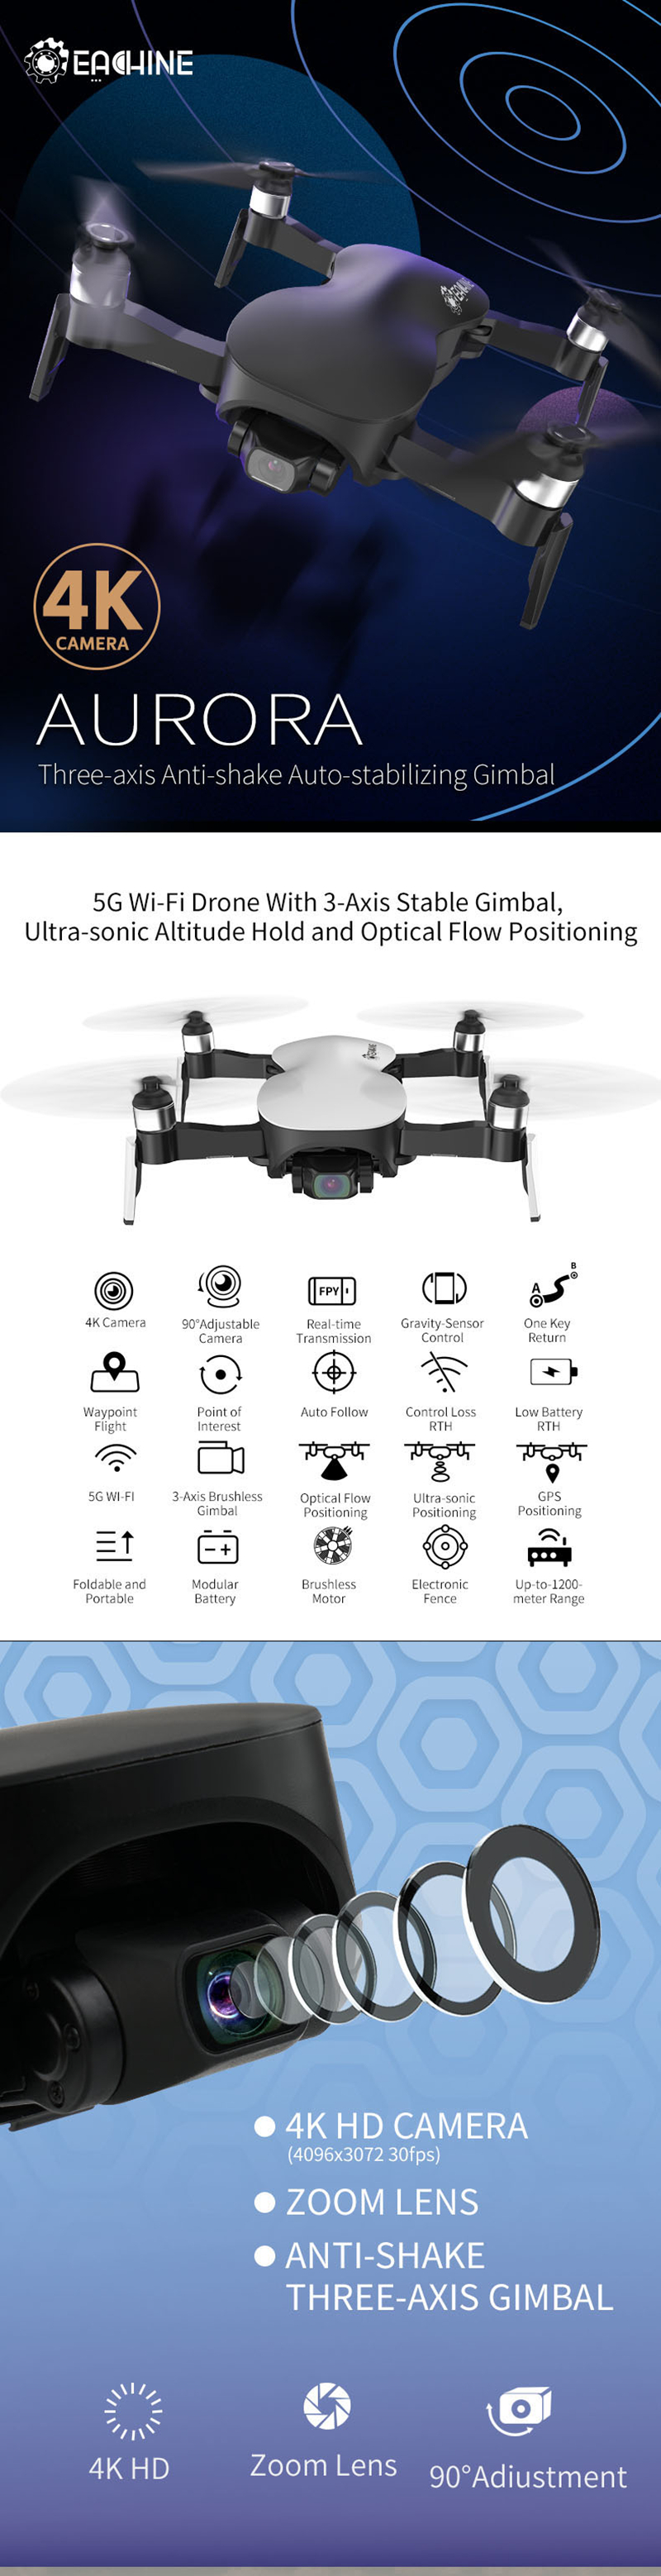 Eachine-EX4-PRO-5G-WIFI-3KM-FPV-GPS-With-4K-HD-Camera-3-Axis-Stable-Gimbal-25-Mins-Flight-Time-RC-Dr-1589424-1